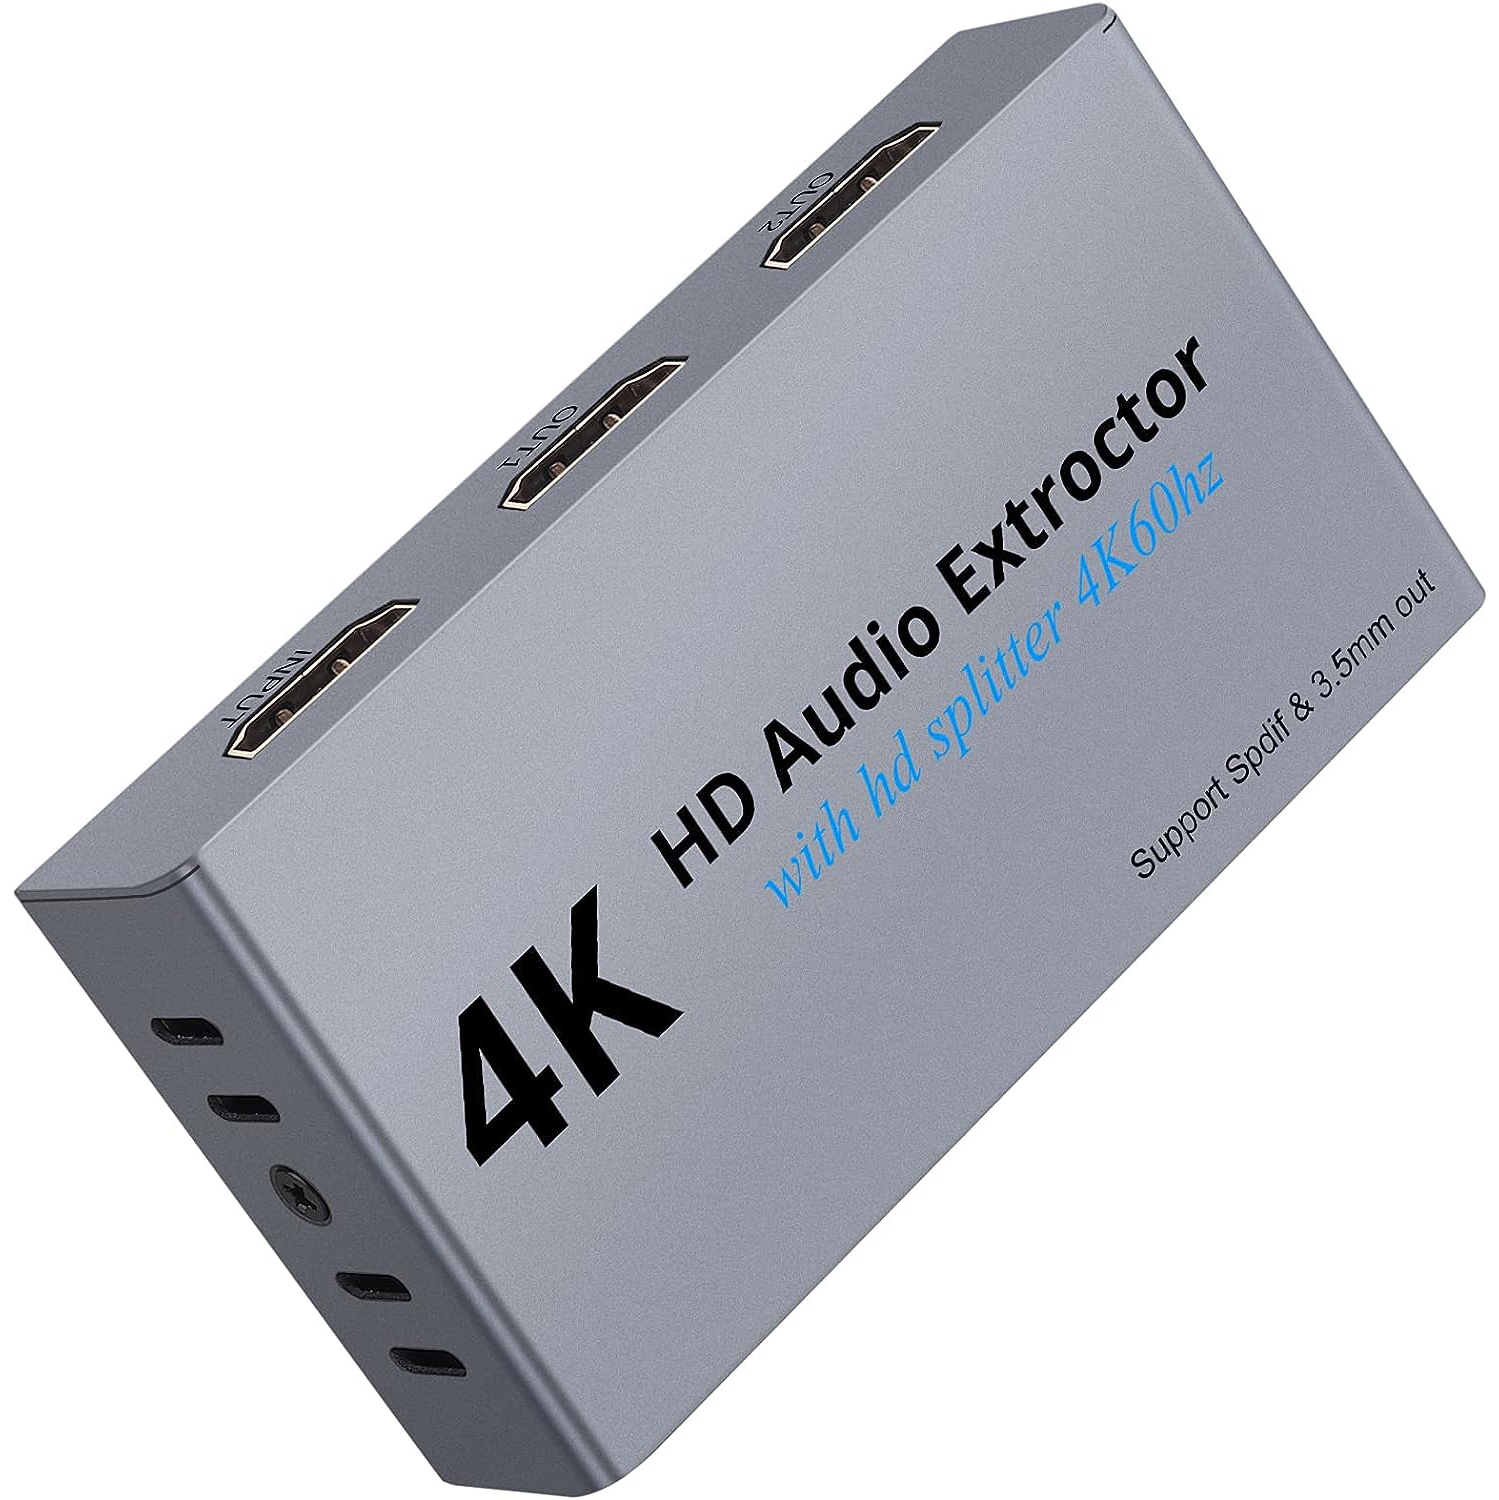 HDMI Splitter, HDMI Audio Extractor 4K with 1X2 HDMI Splitter, HDMI to Optical SPDIF Toslink Converter, 3.5mm